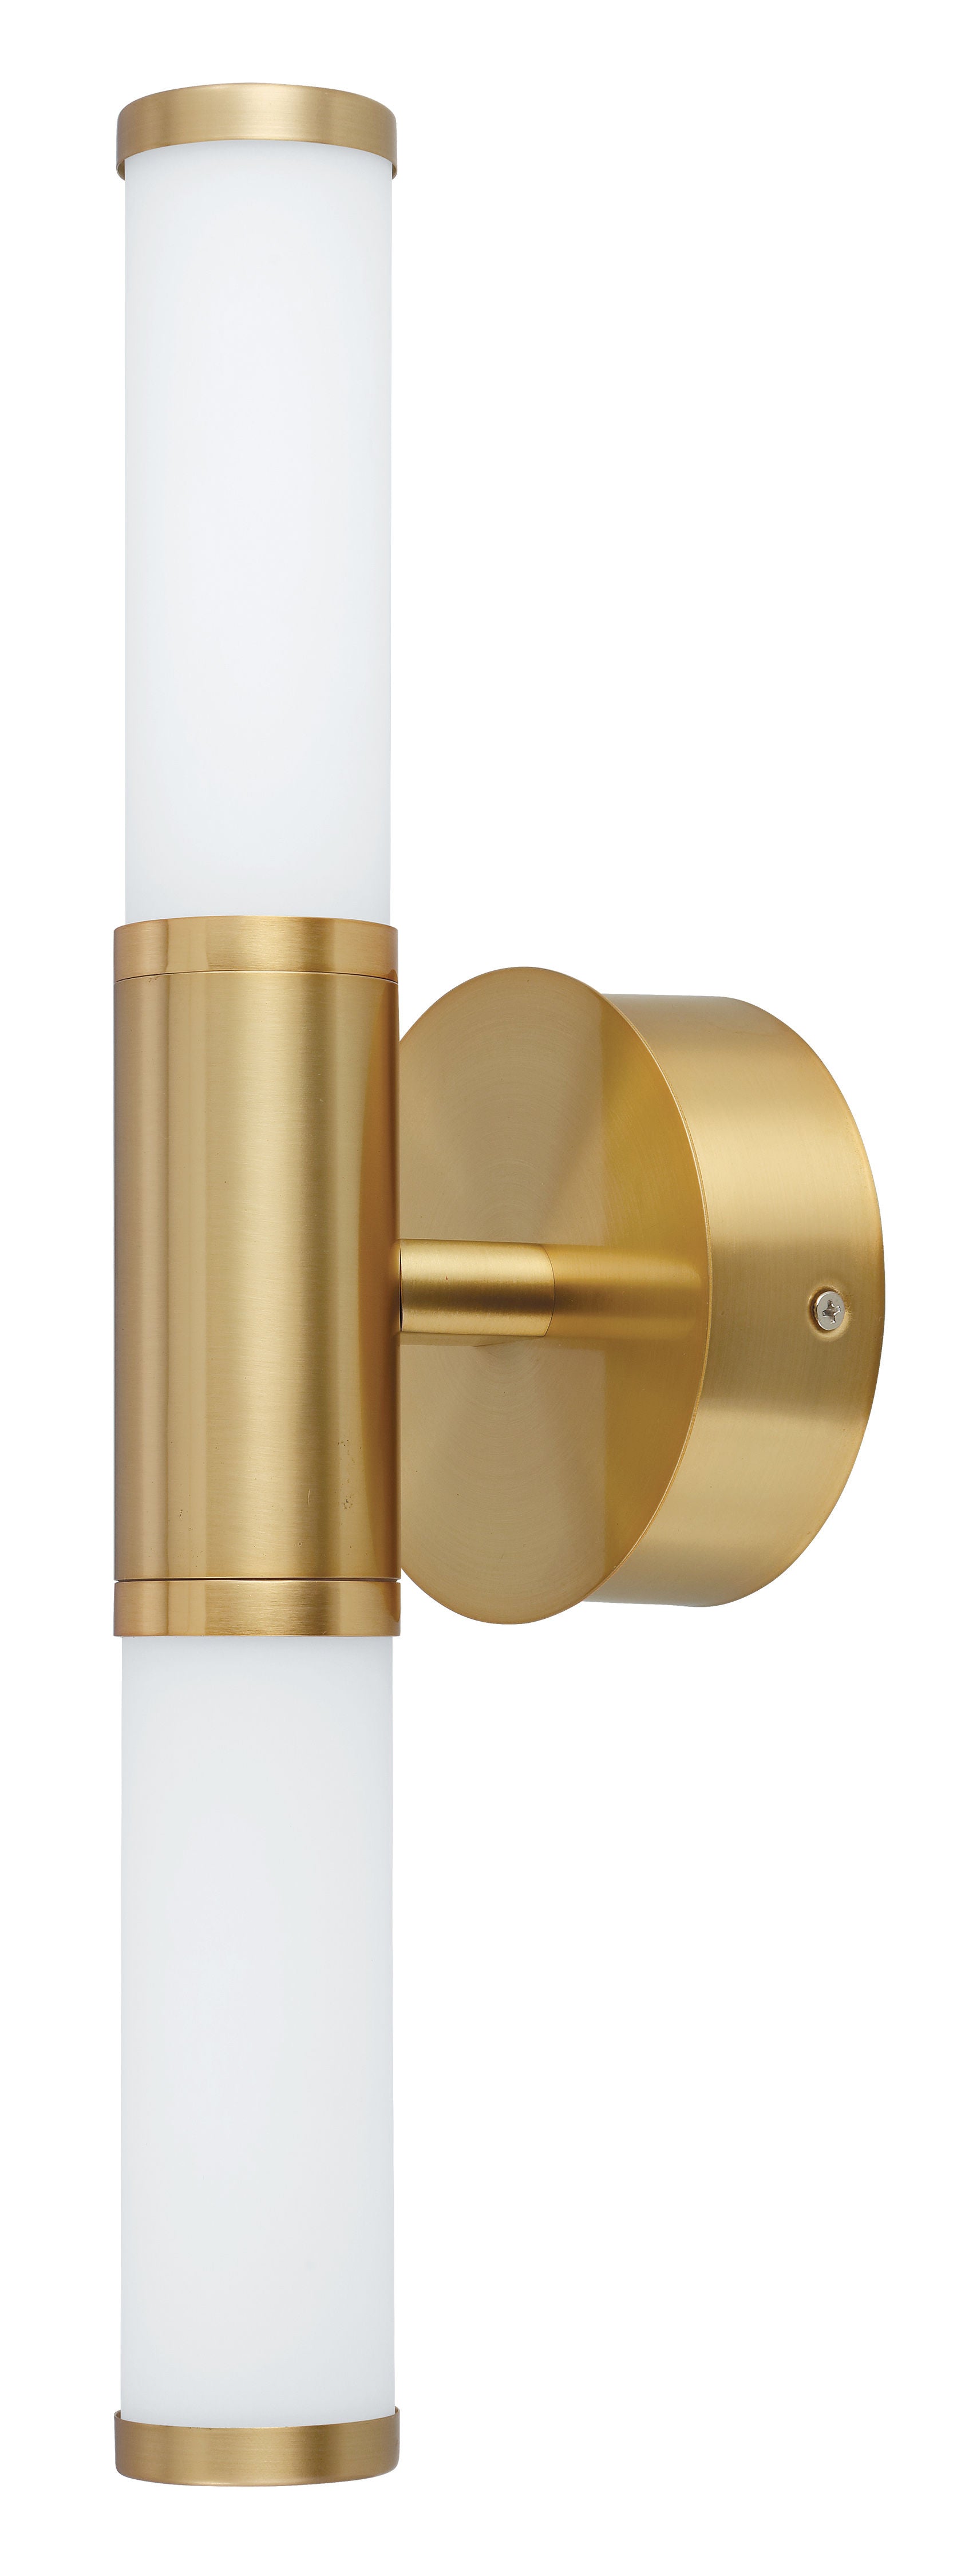 Palmera 1 Sconce Gold INTEGRATED LED - 204374A | EGLO